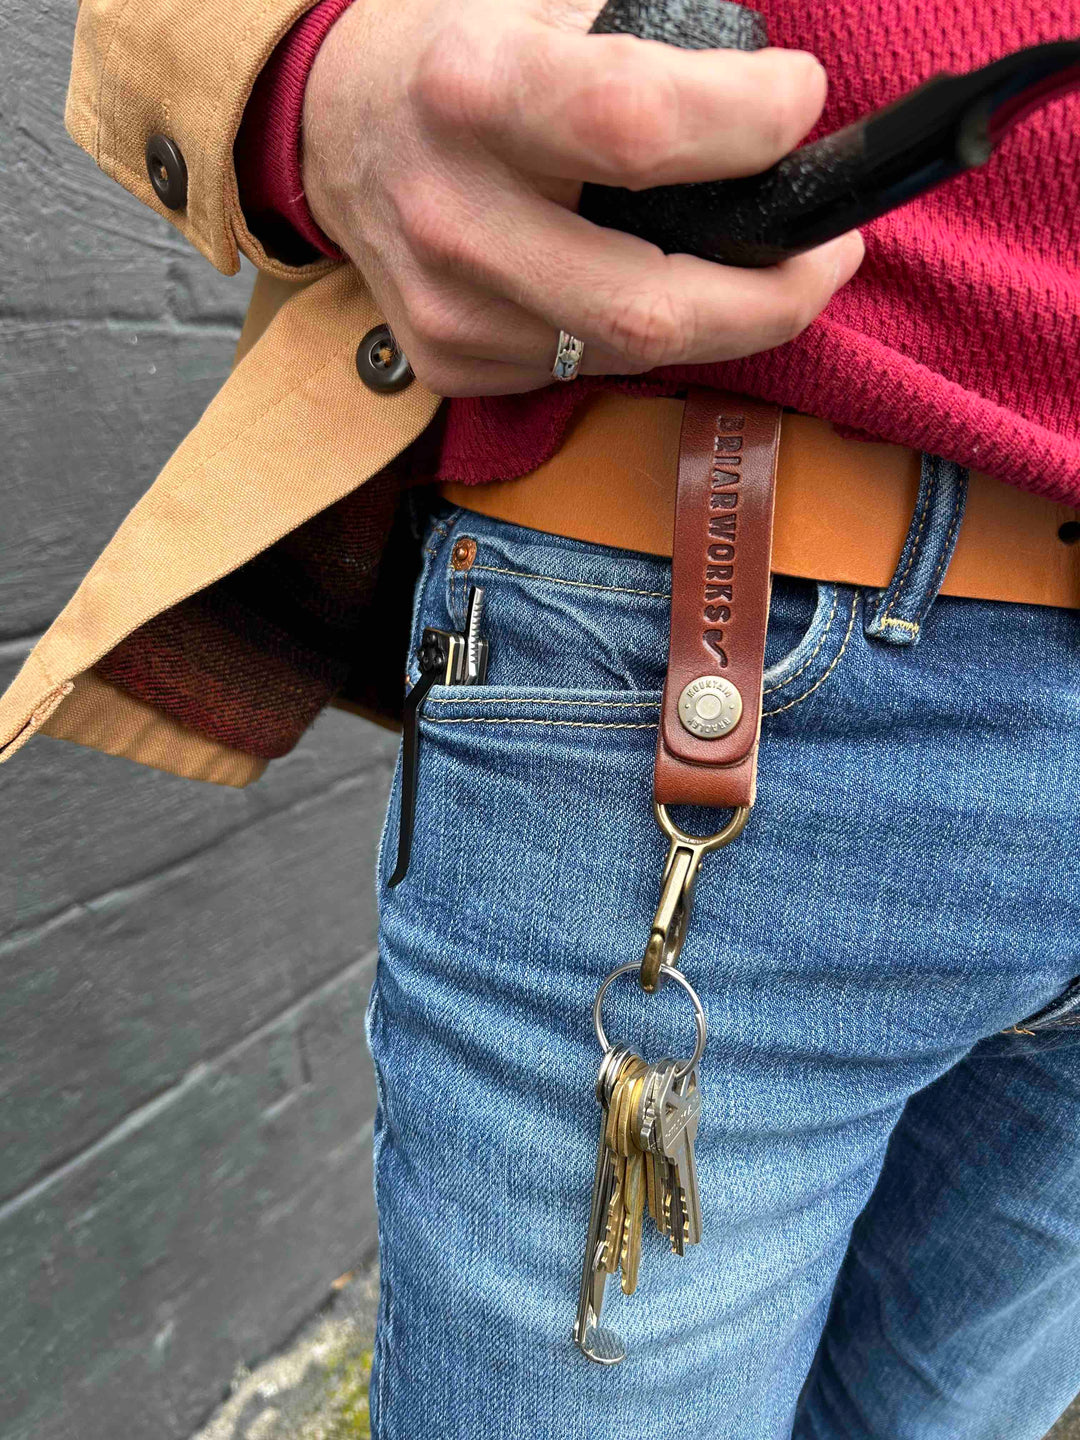 BriarWorks x Bradley Mountain Leather Key Fob and Pipe Rest - Brown